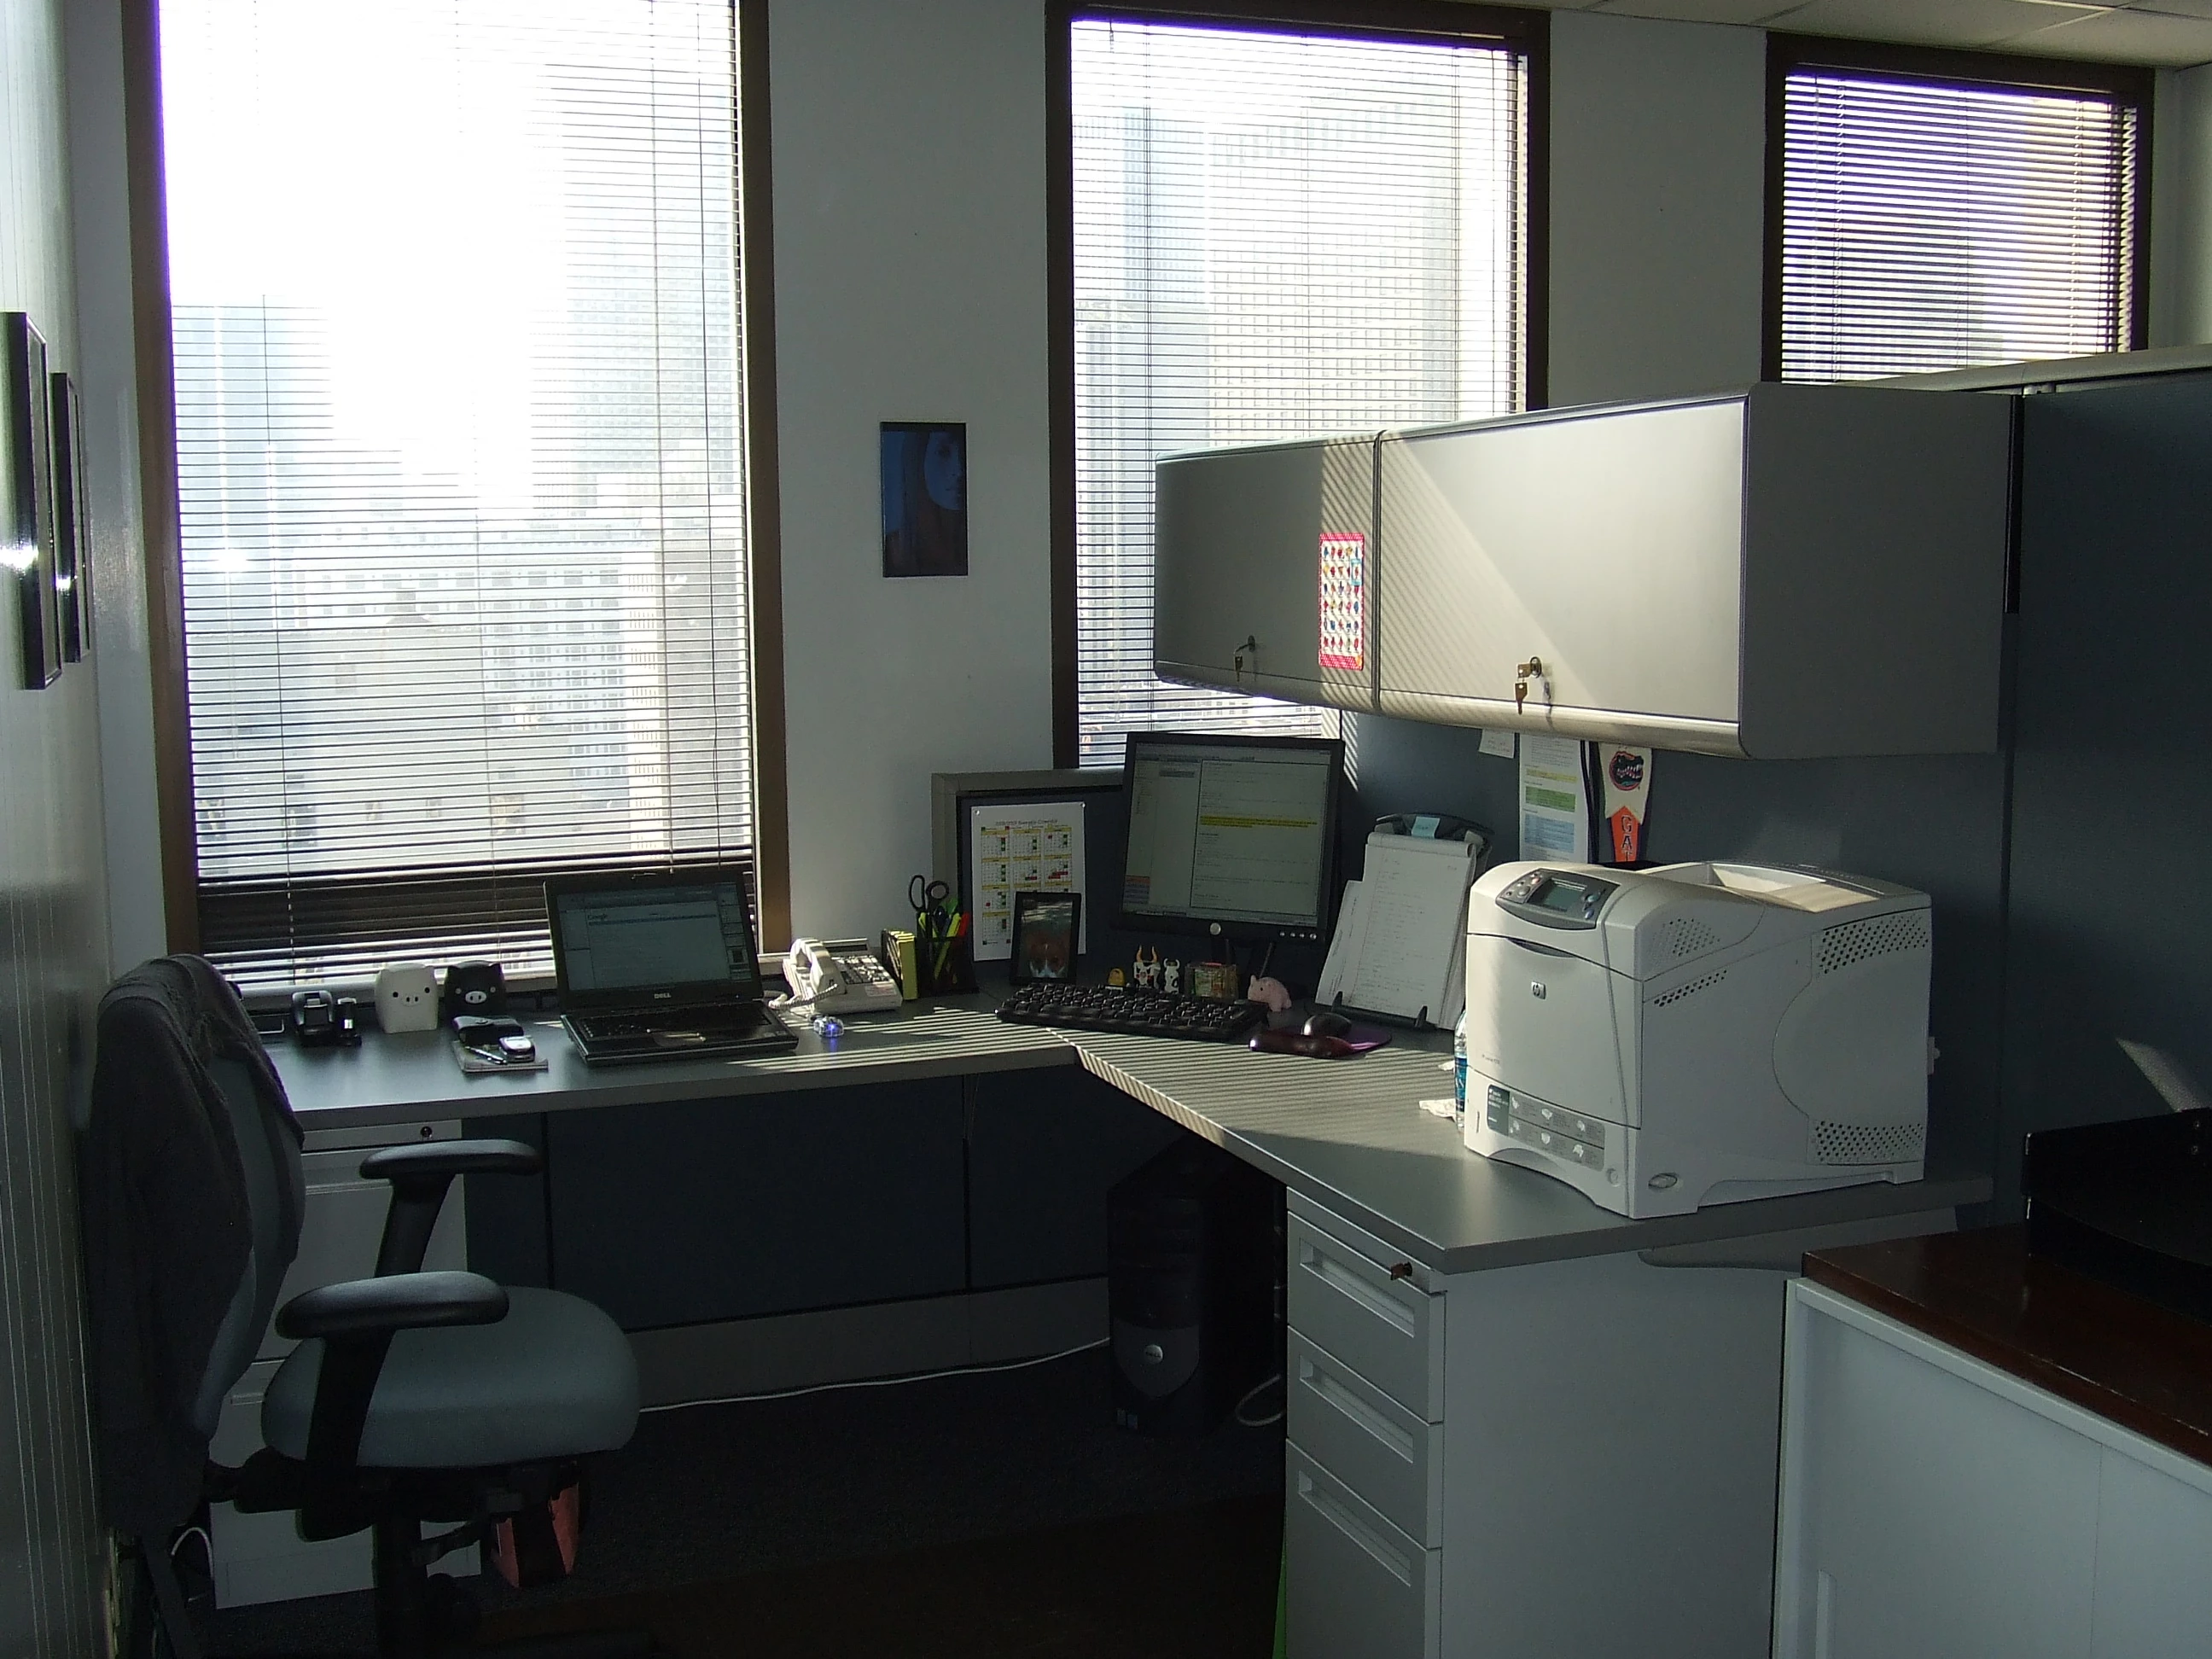 8-15-08 - The Office